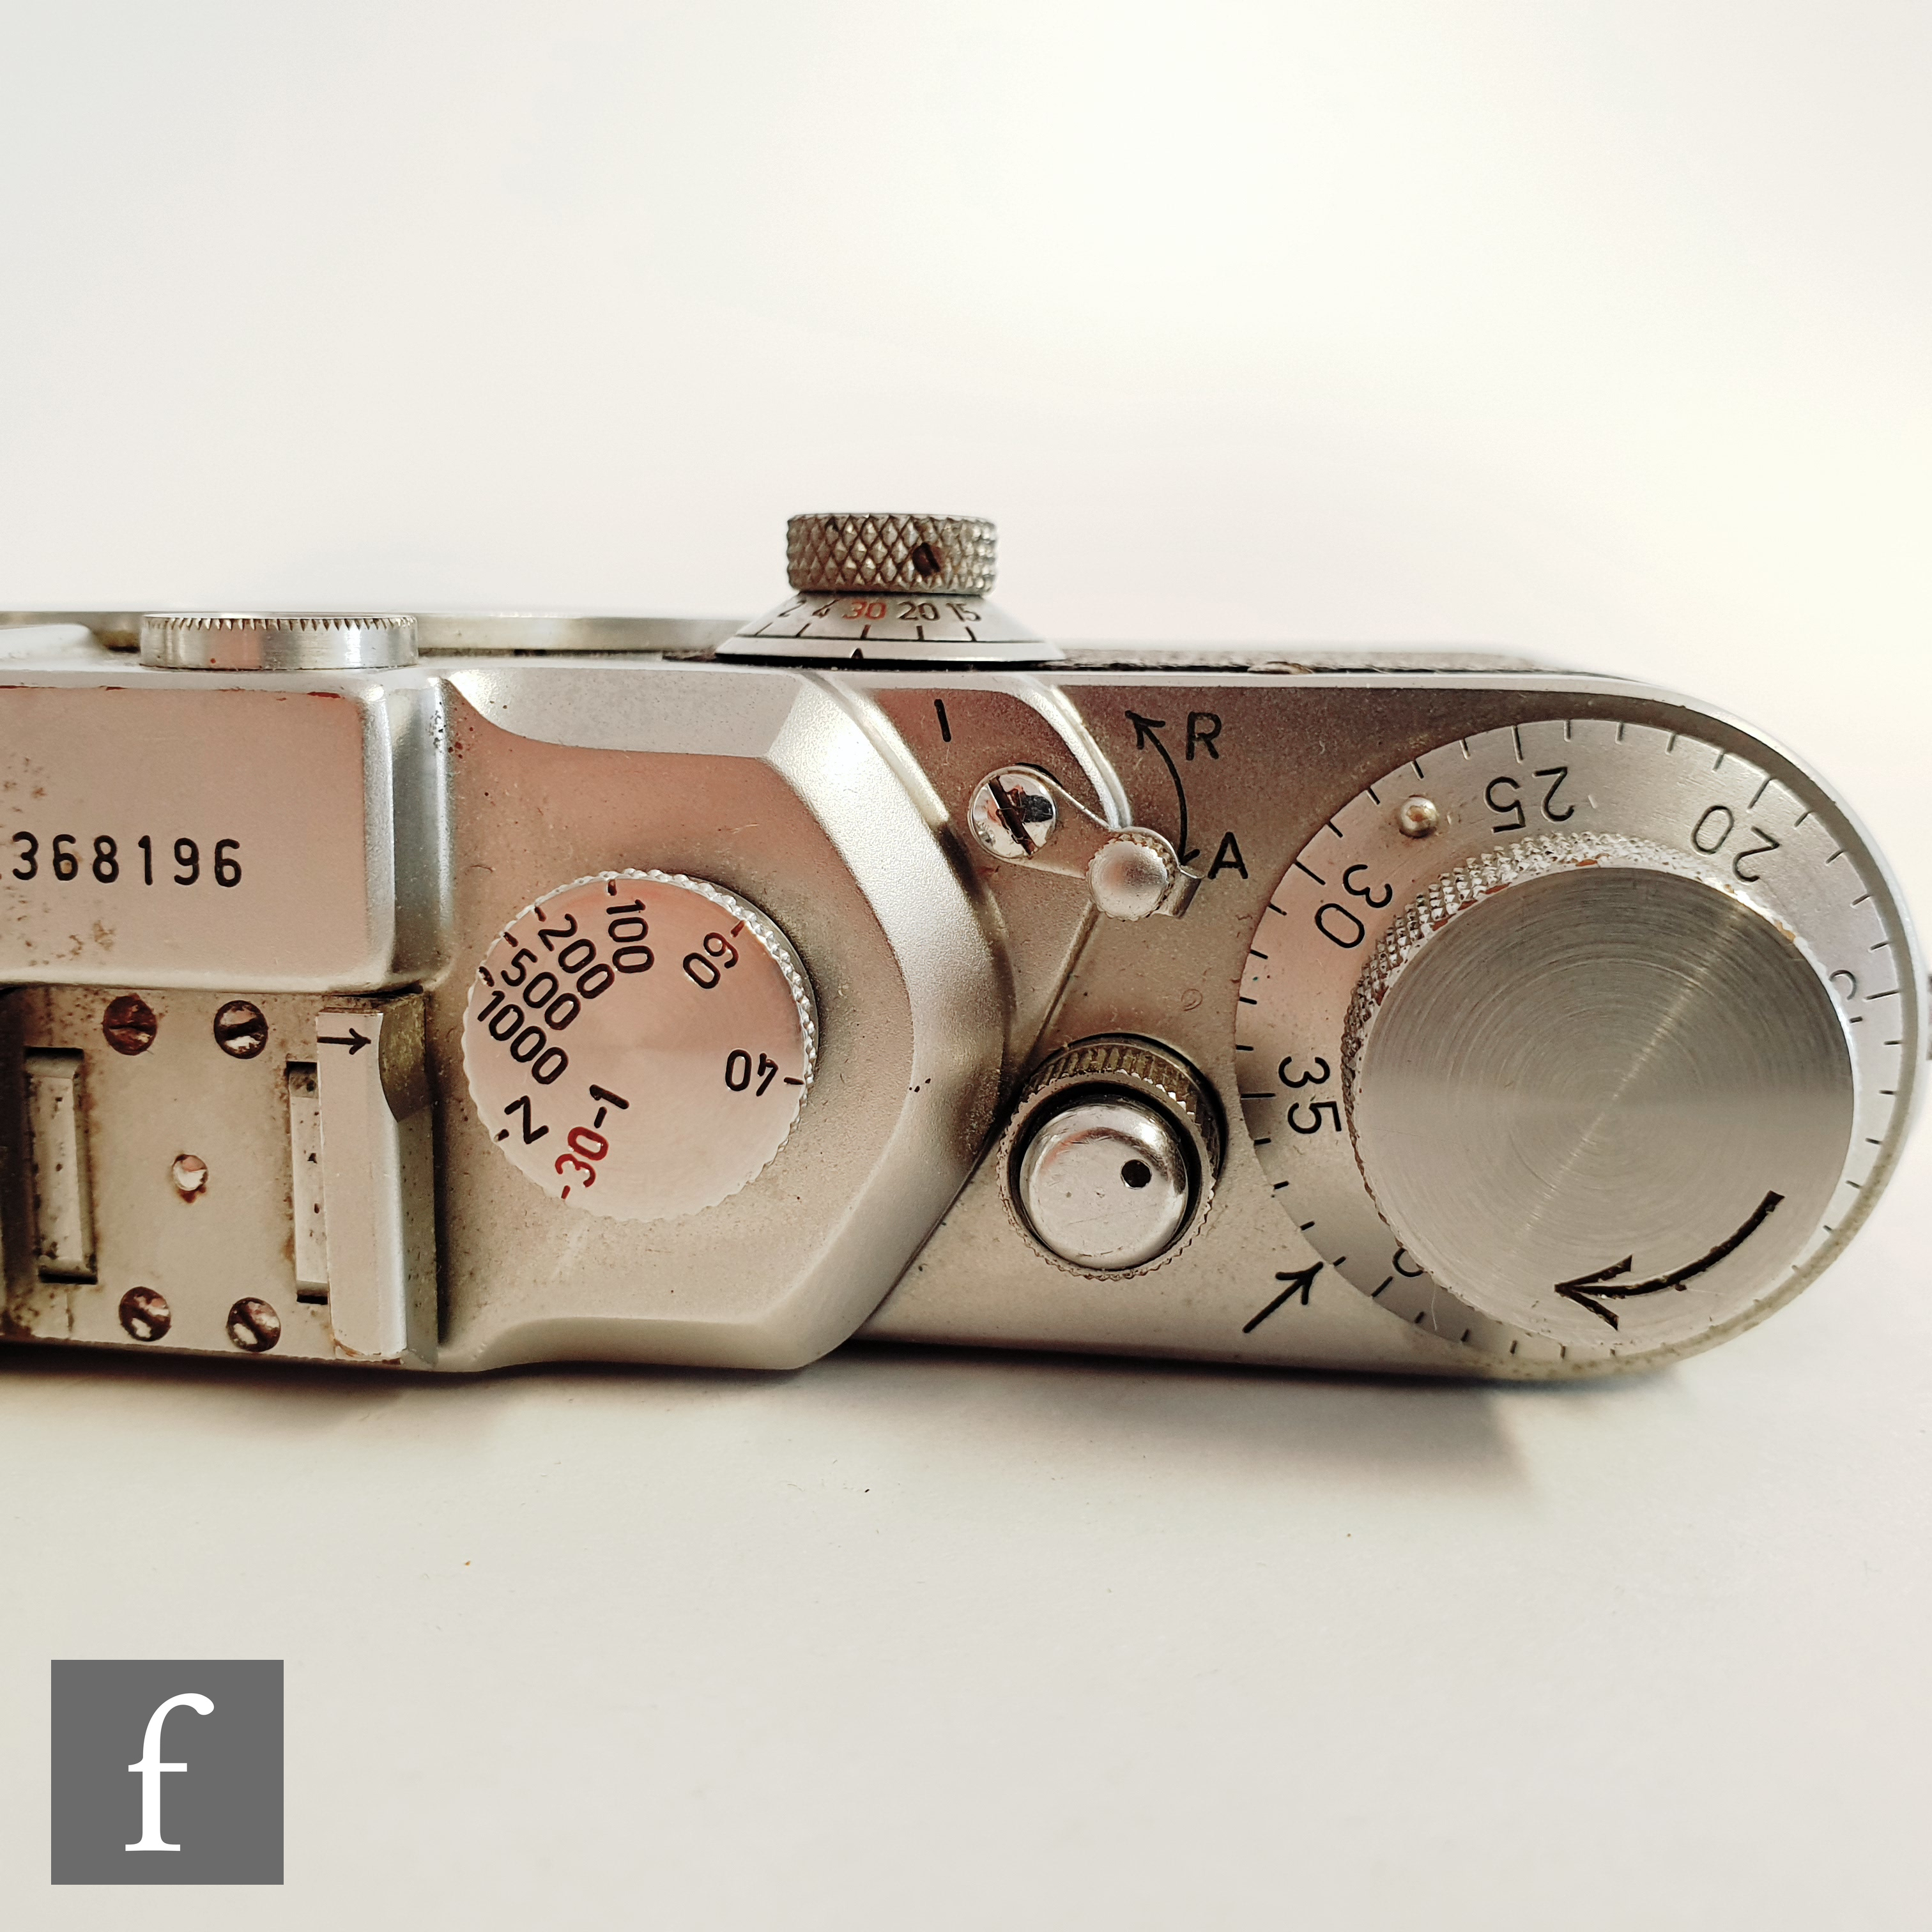 A Leica IIIC rangefinder camera, circa 1941, serial number 368196, Chrome body, with Ernst Leitz - Image 3 of 11